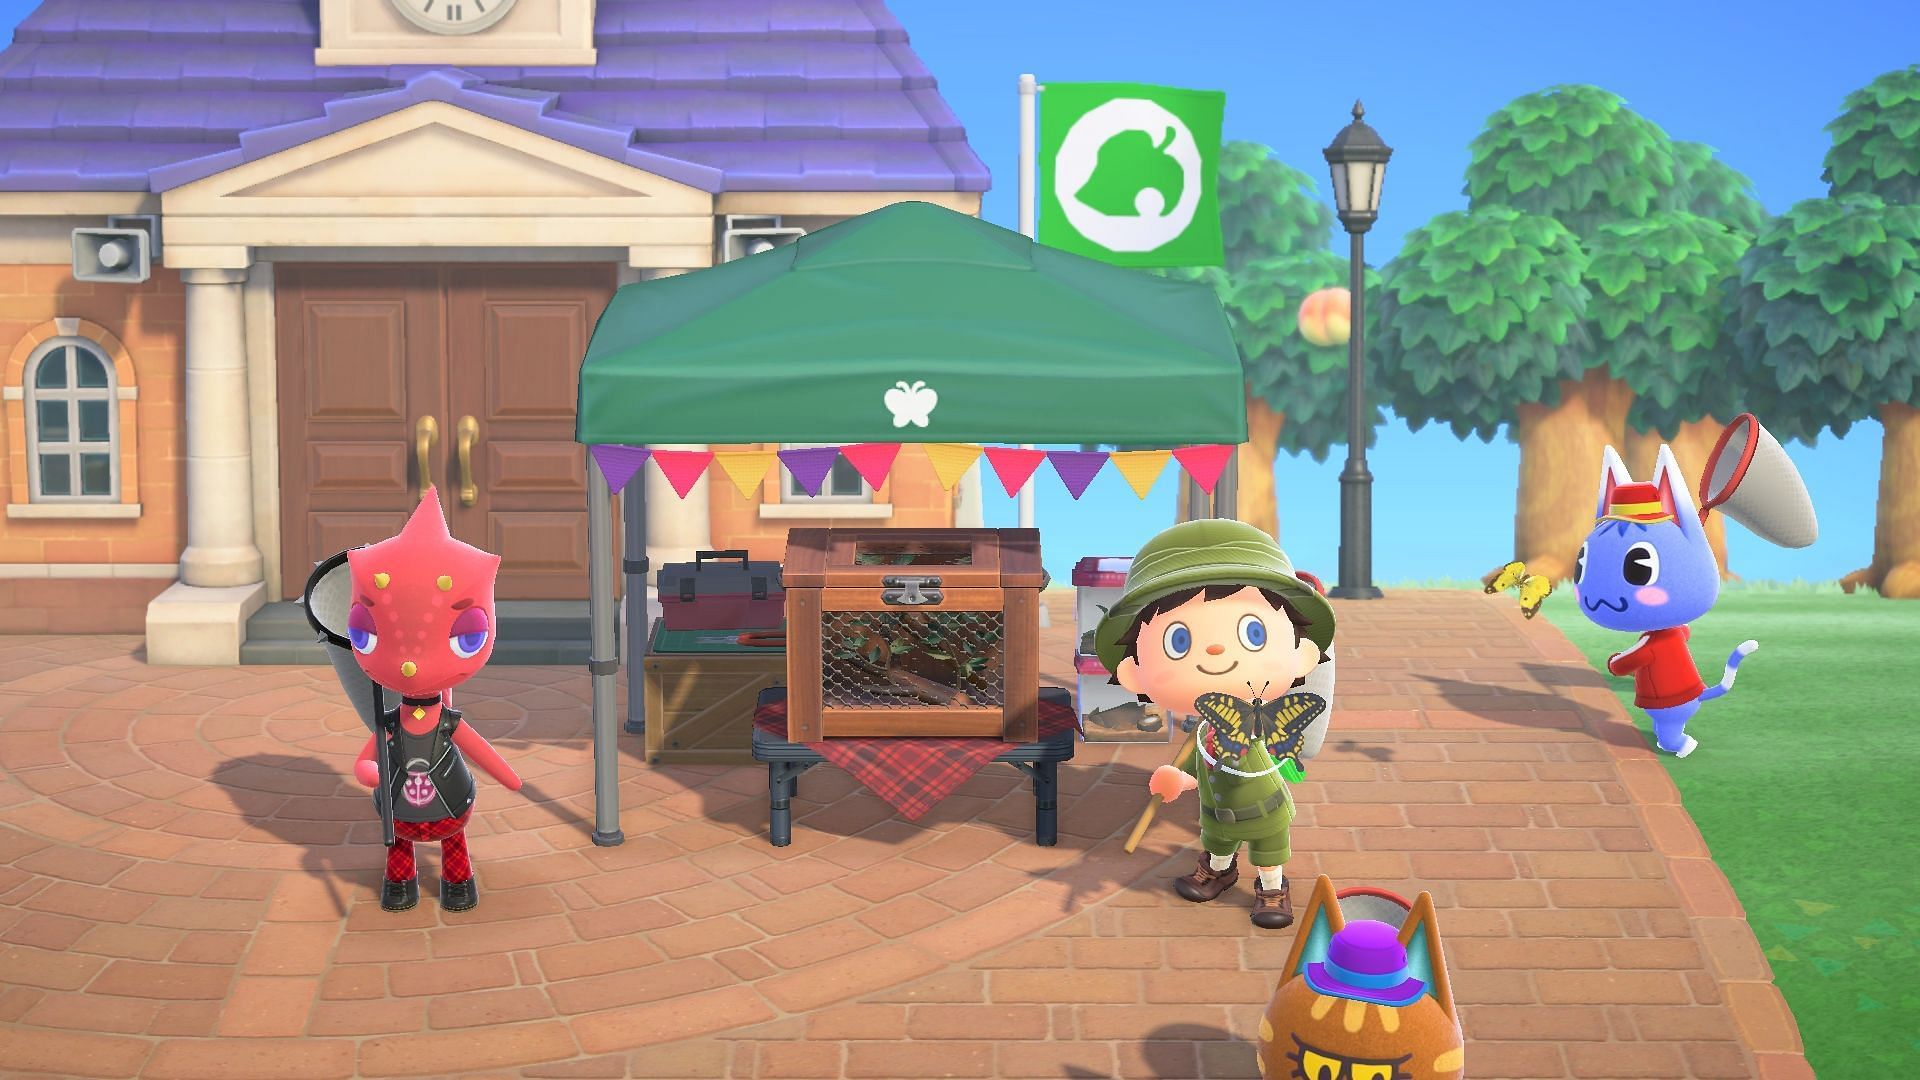 Events players can look forward to in Animal Crossing: New Horizons in March (Image via Siliconera)